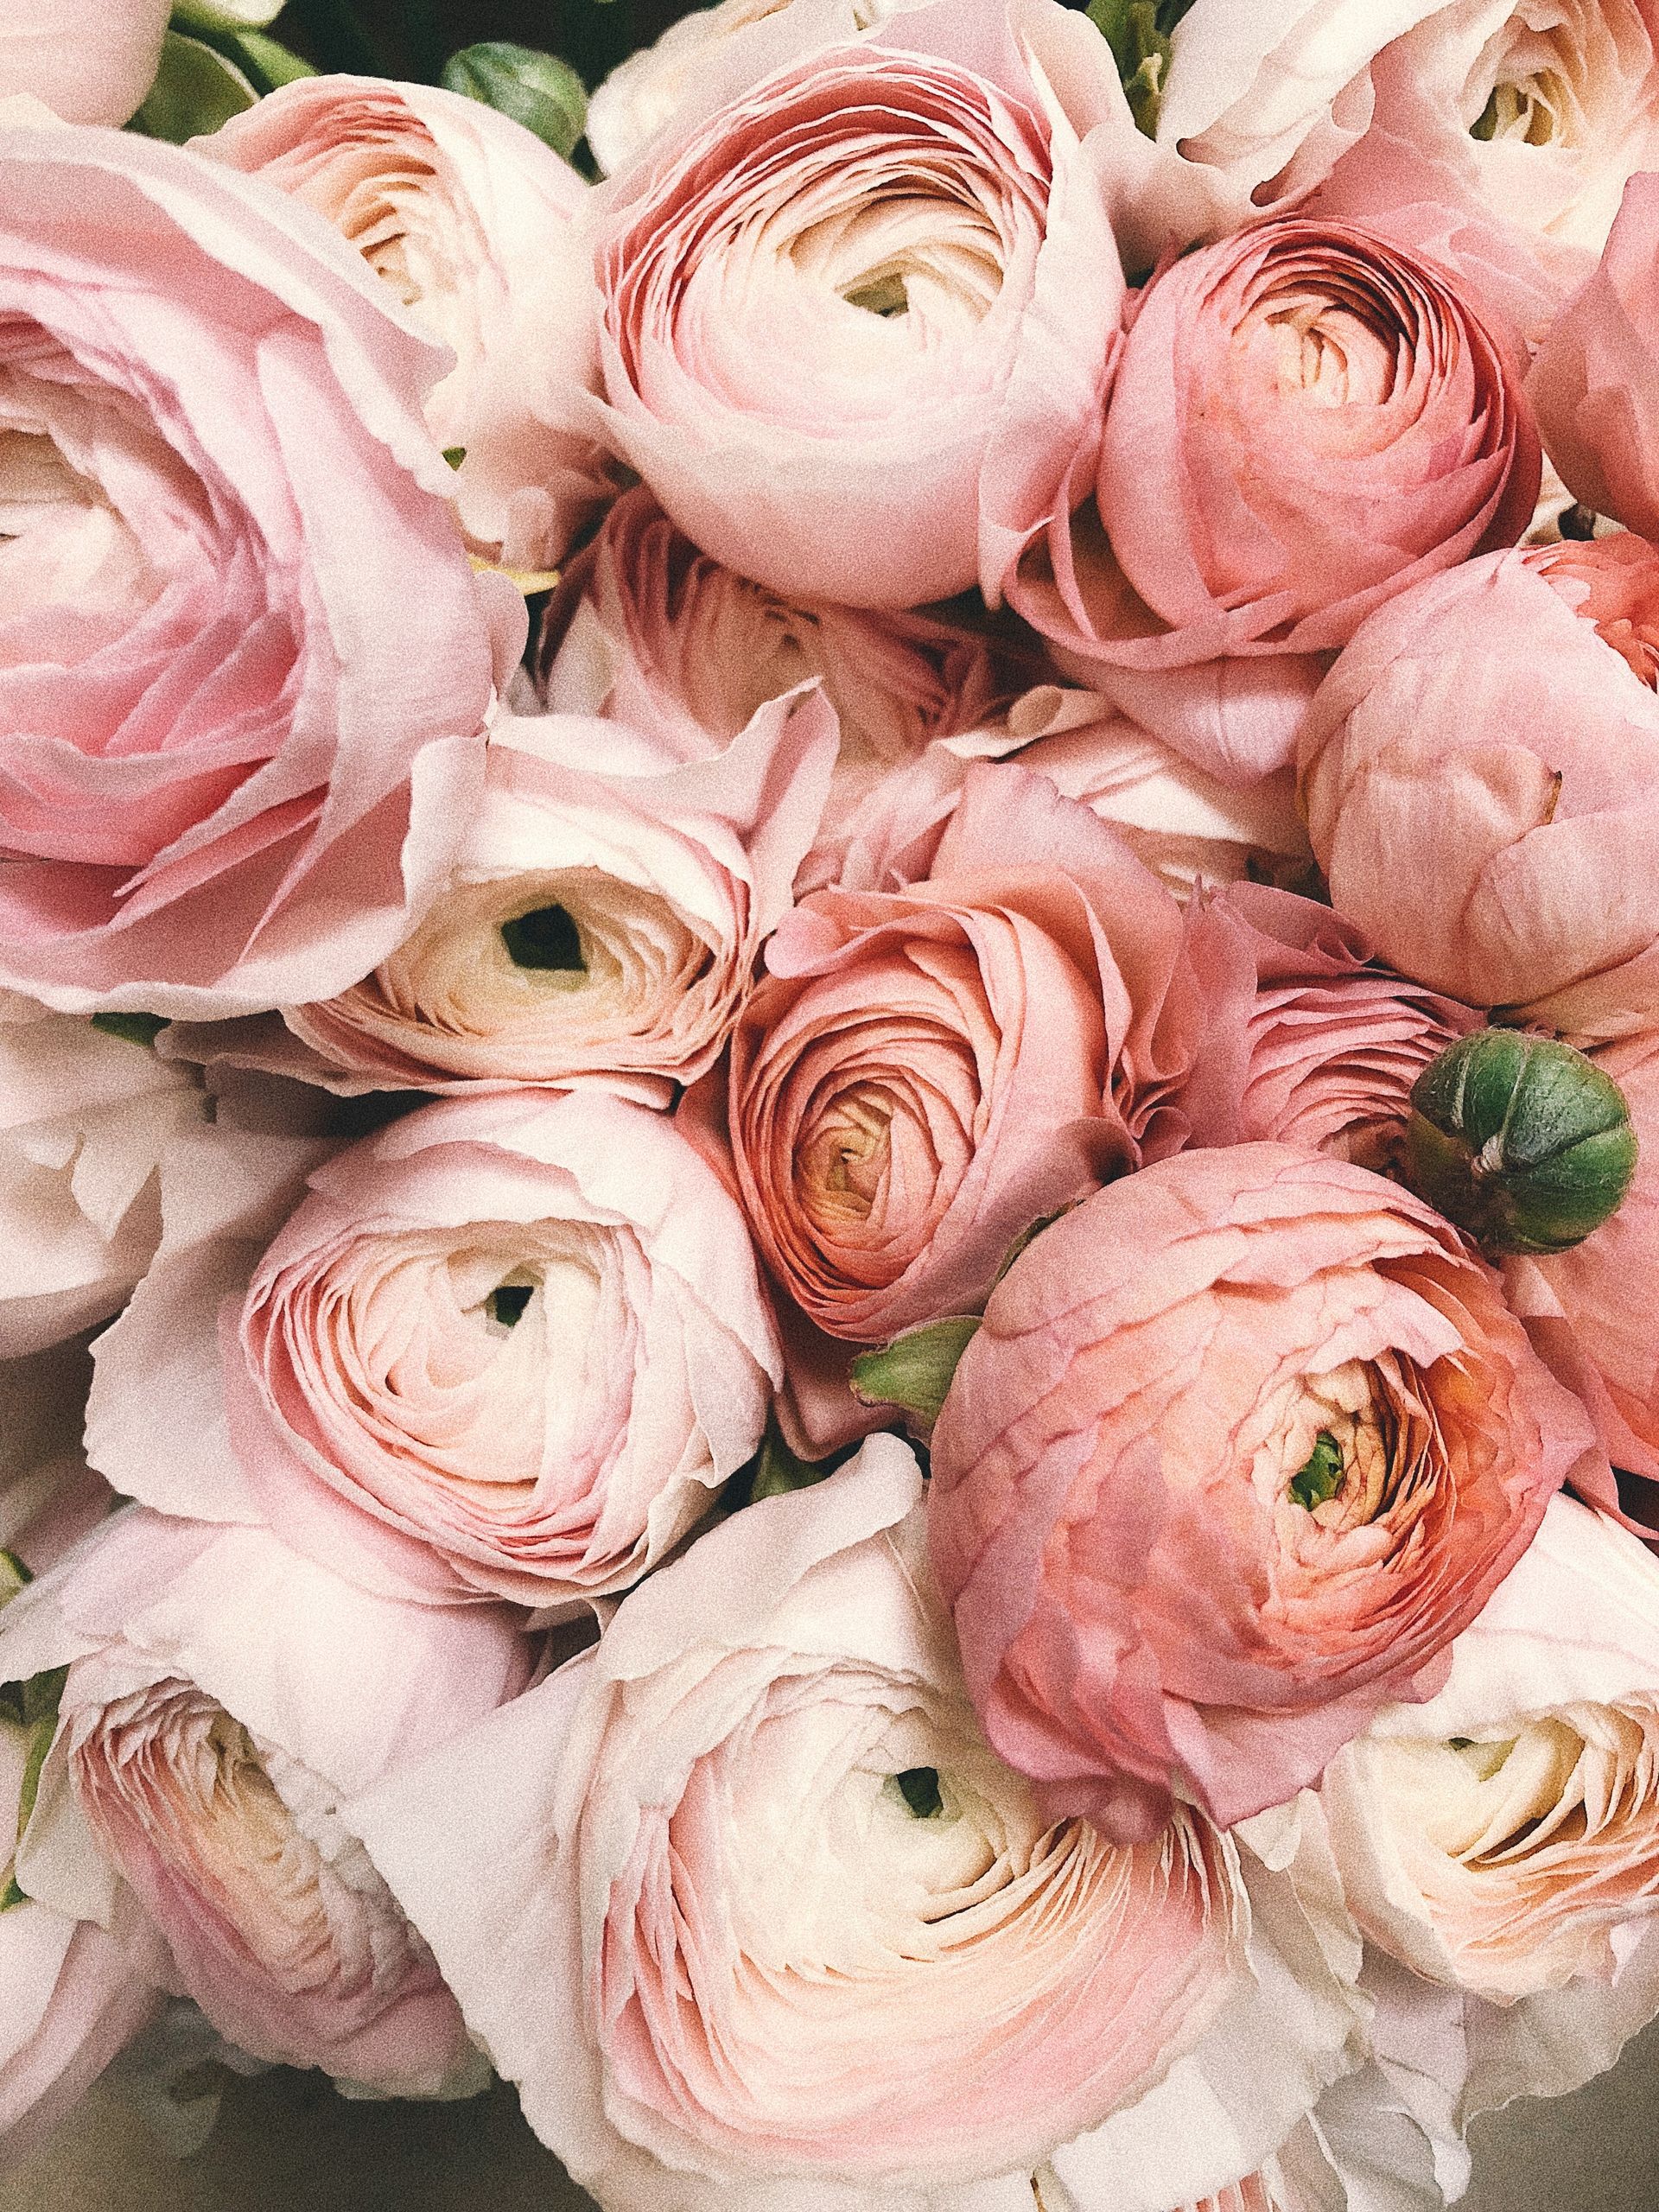 A beautiful bunch of pale pink roses.